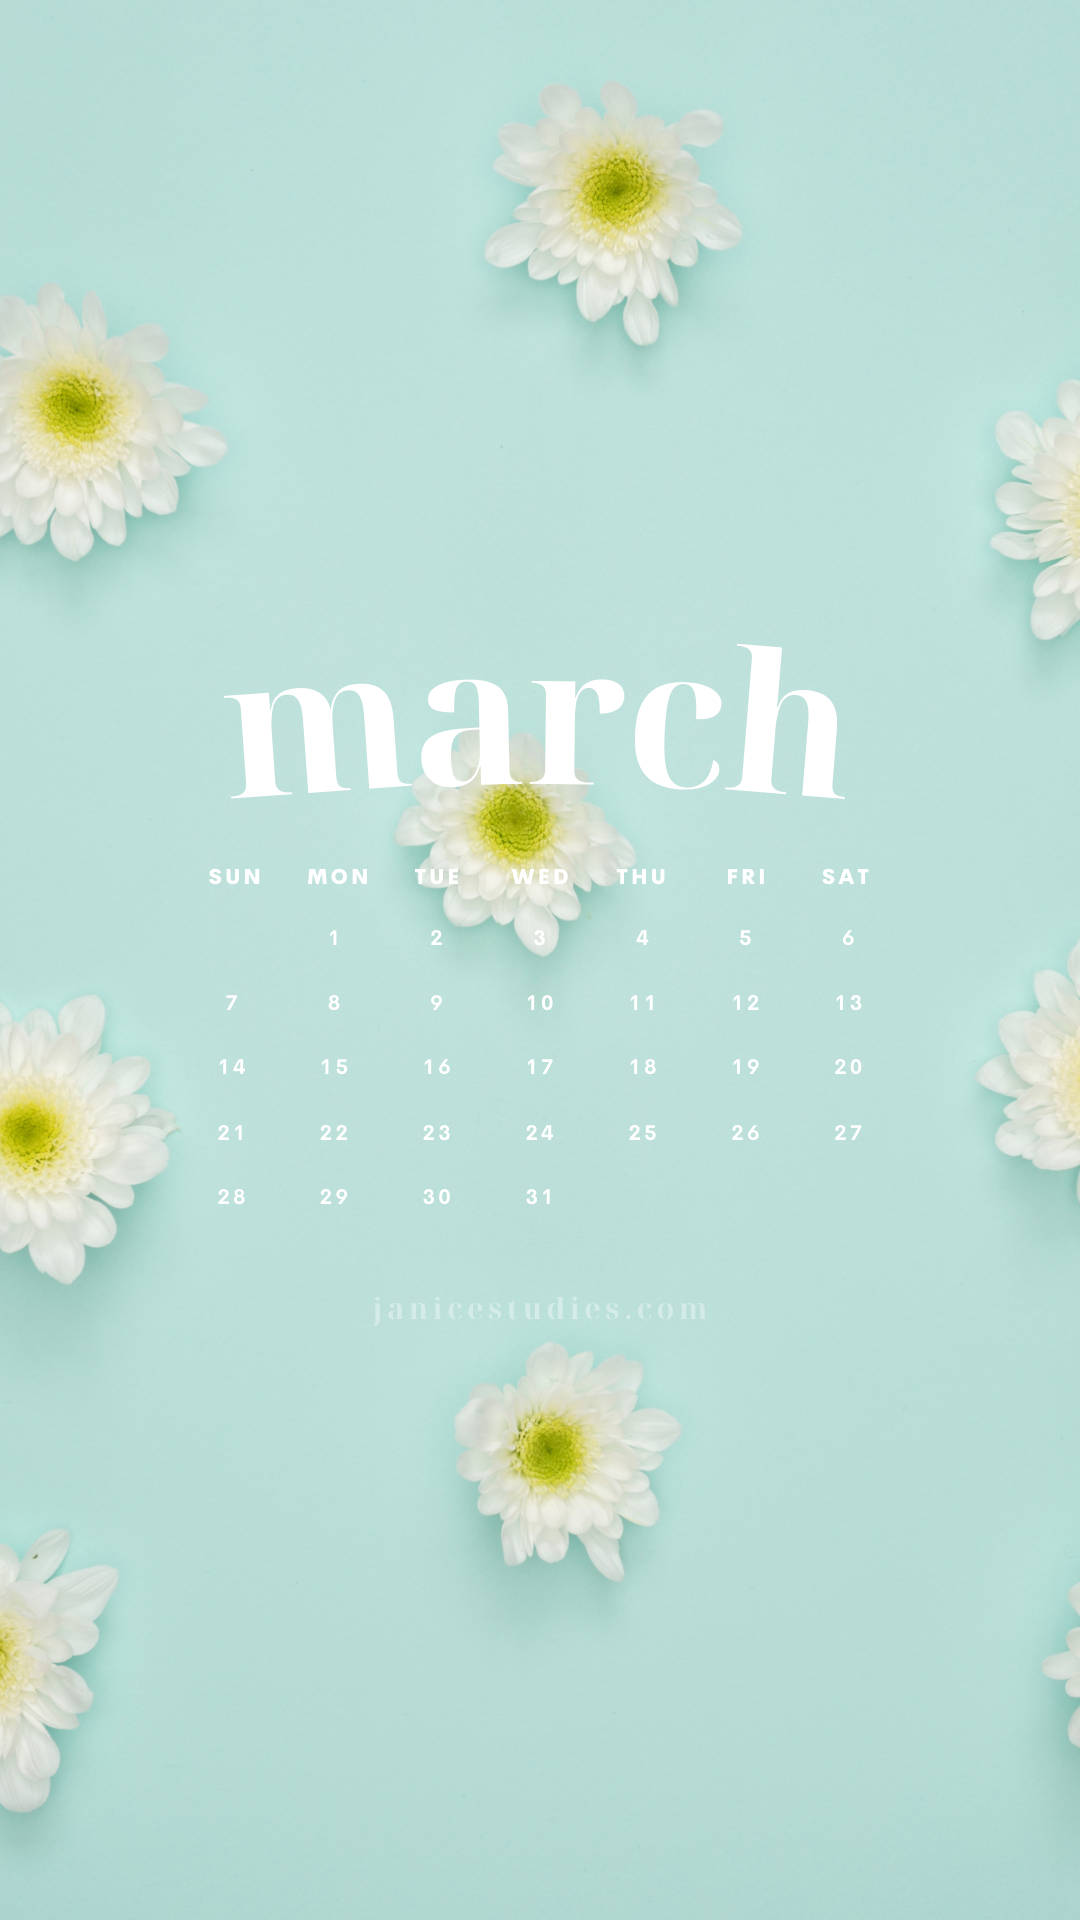 March Calendar With Daisies Wallpaper